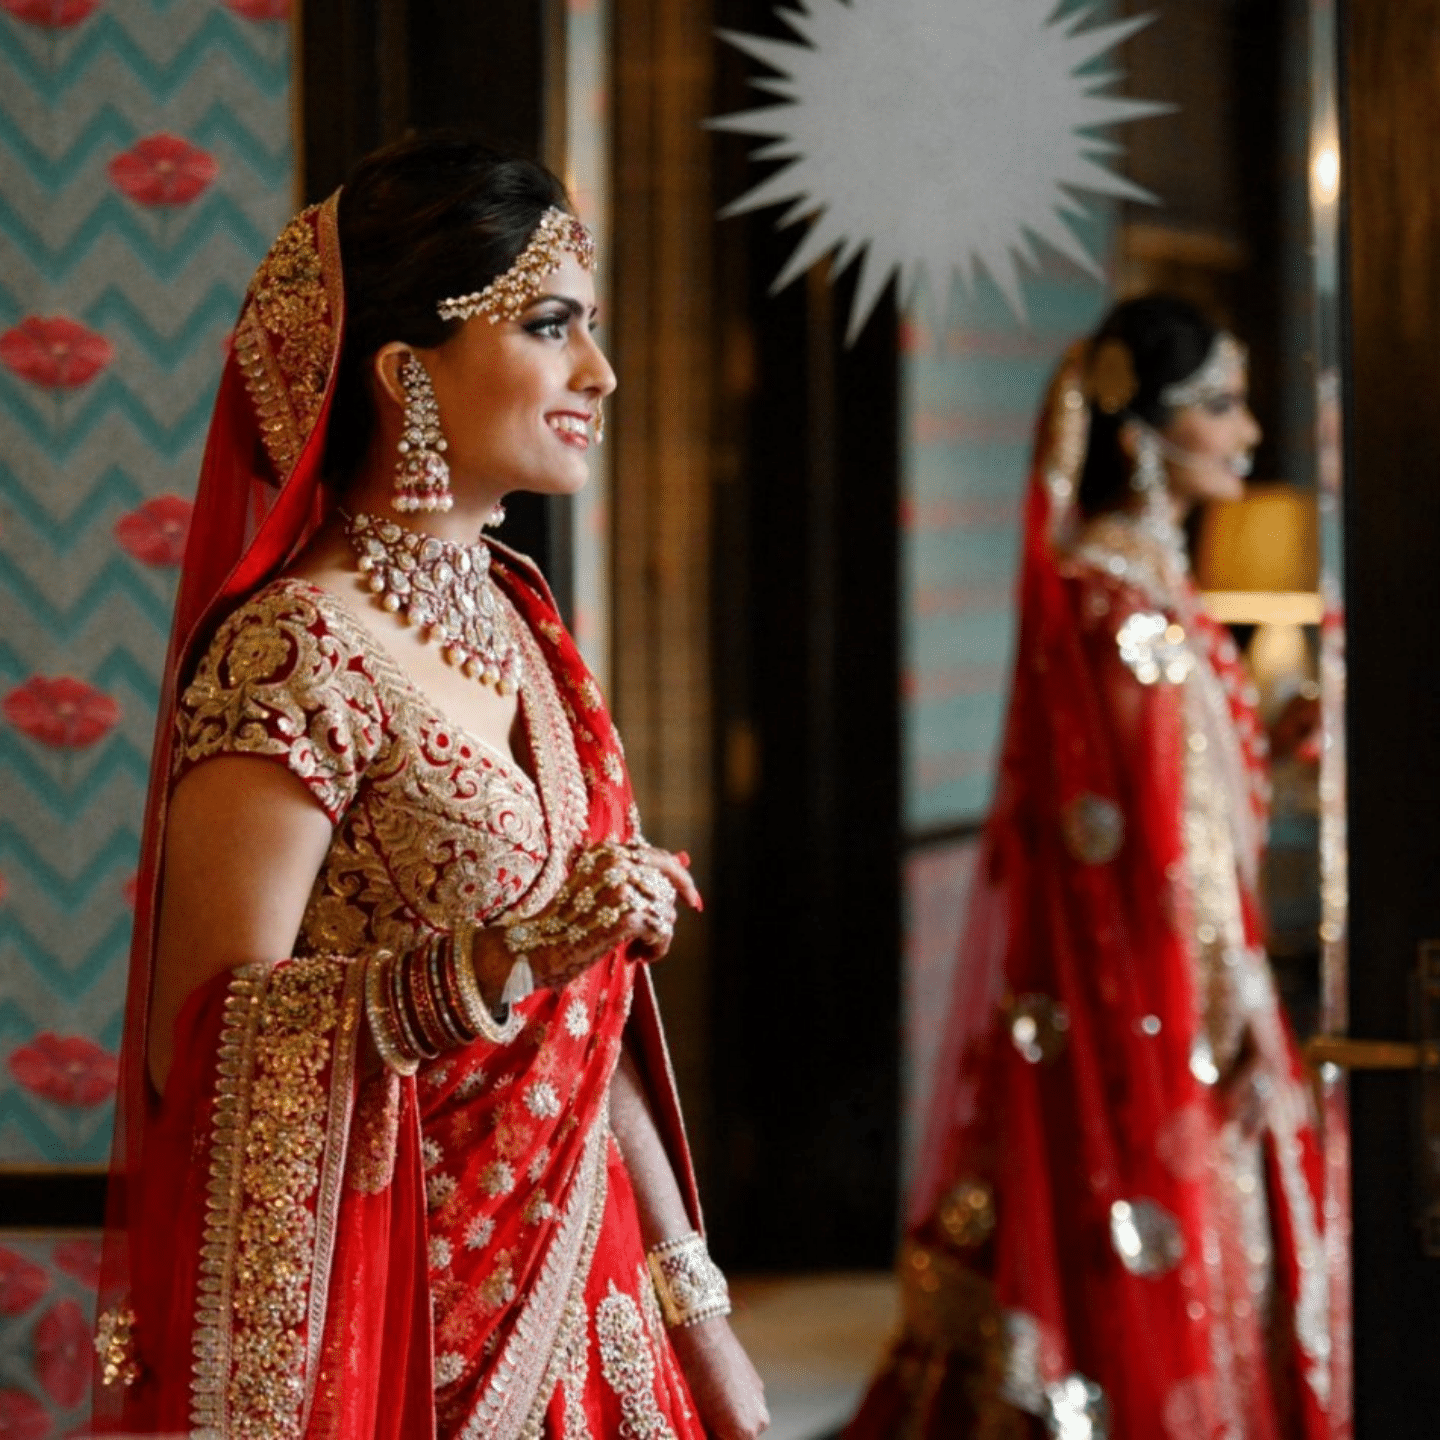 Your Guide To Planning An Indian Wedding Tips From An Indian Bride